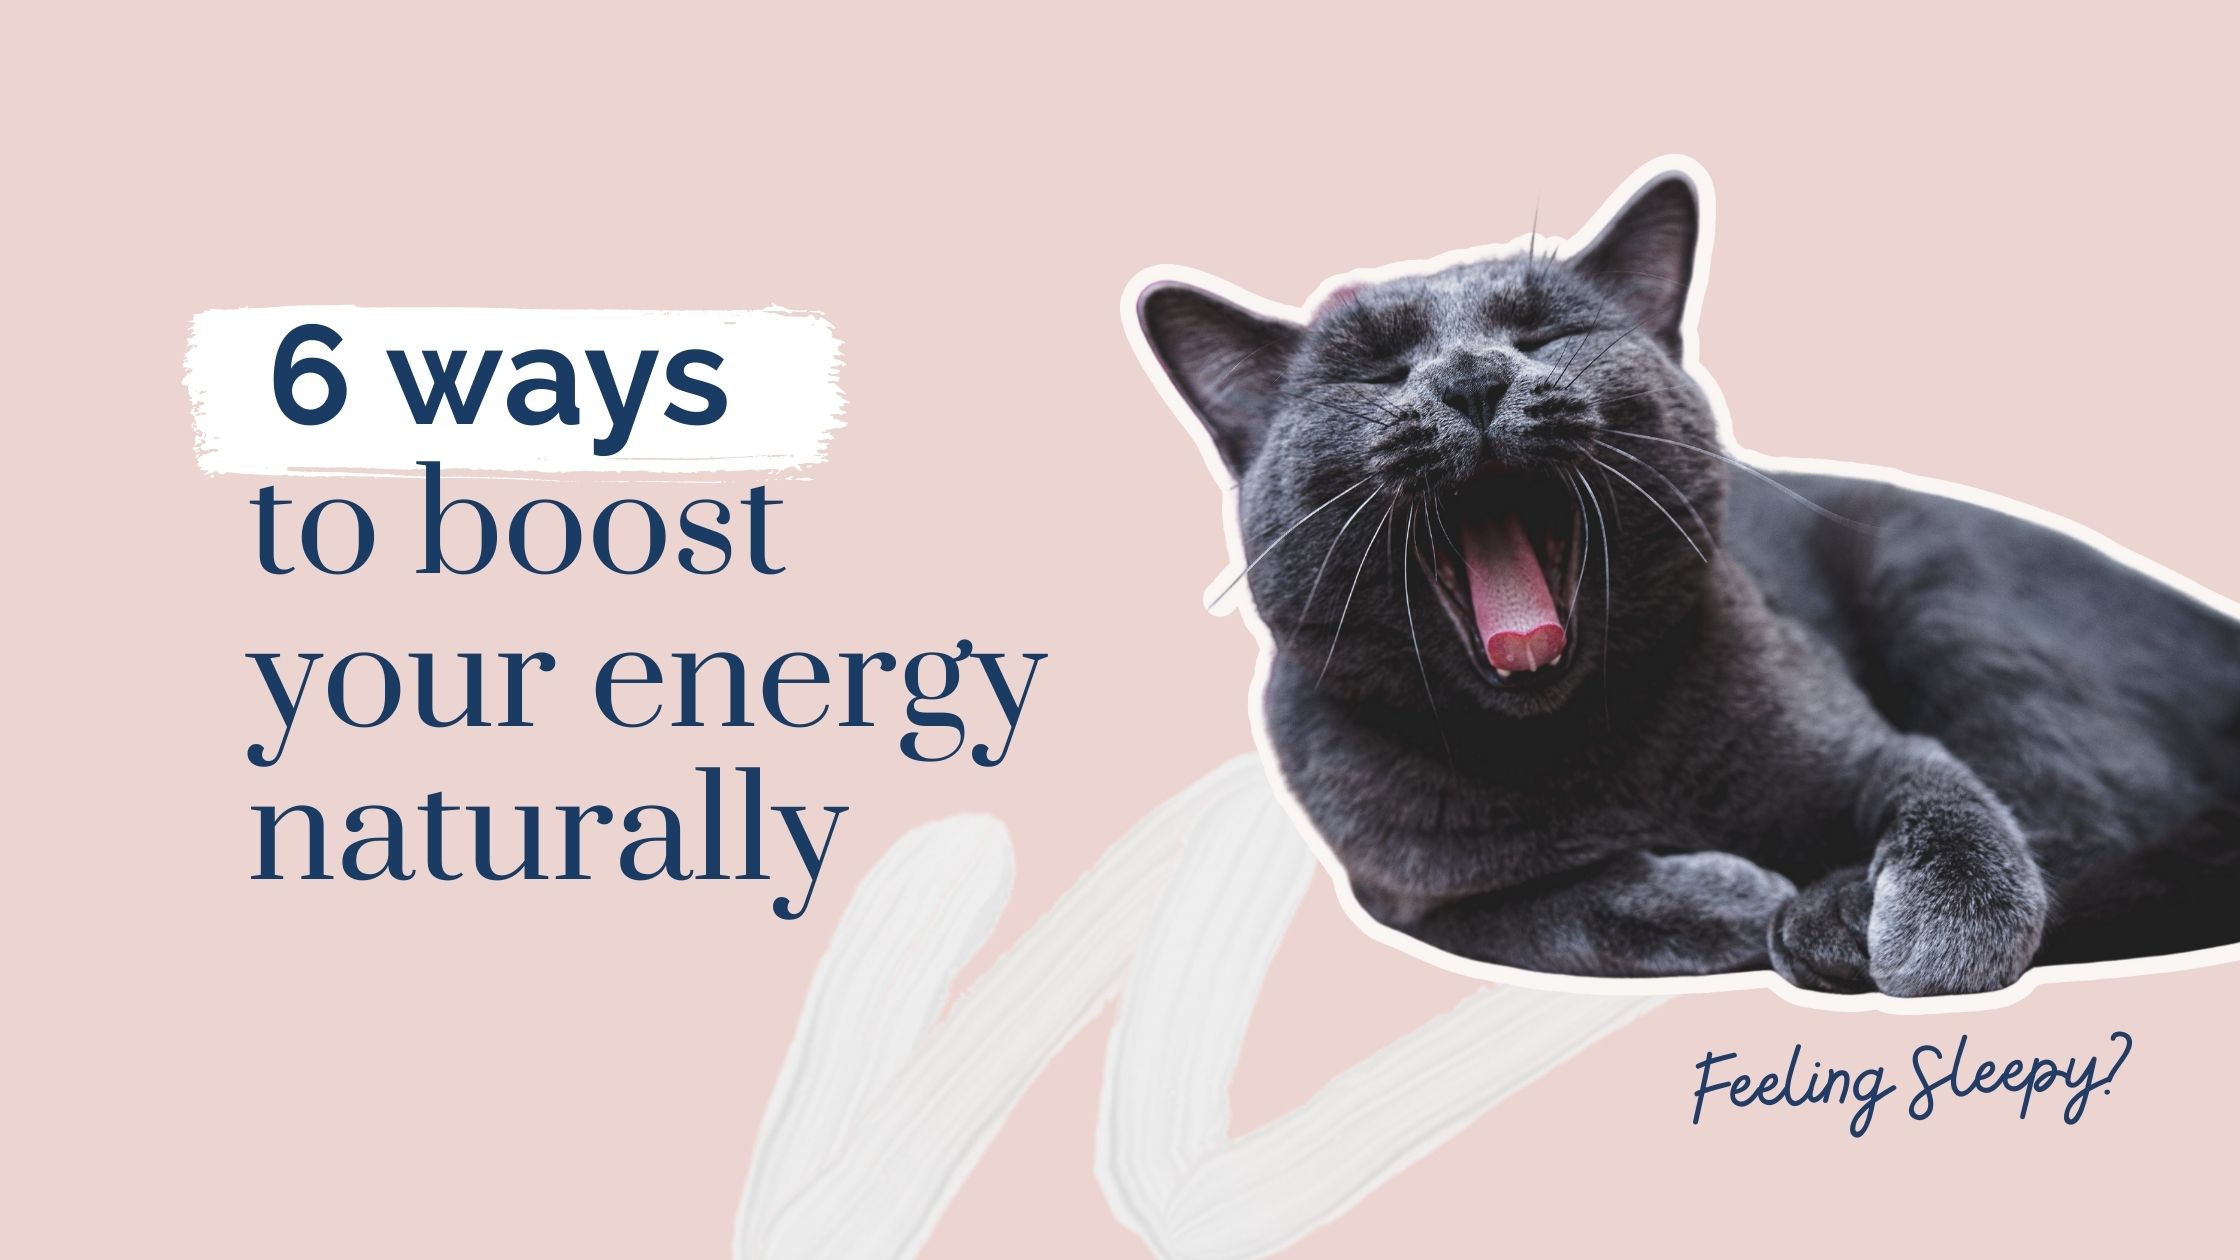 Feeling tired? 6 natural ways to boost your energy levels. Image: Unsplash